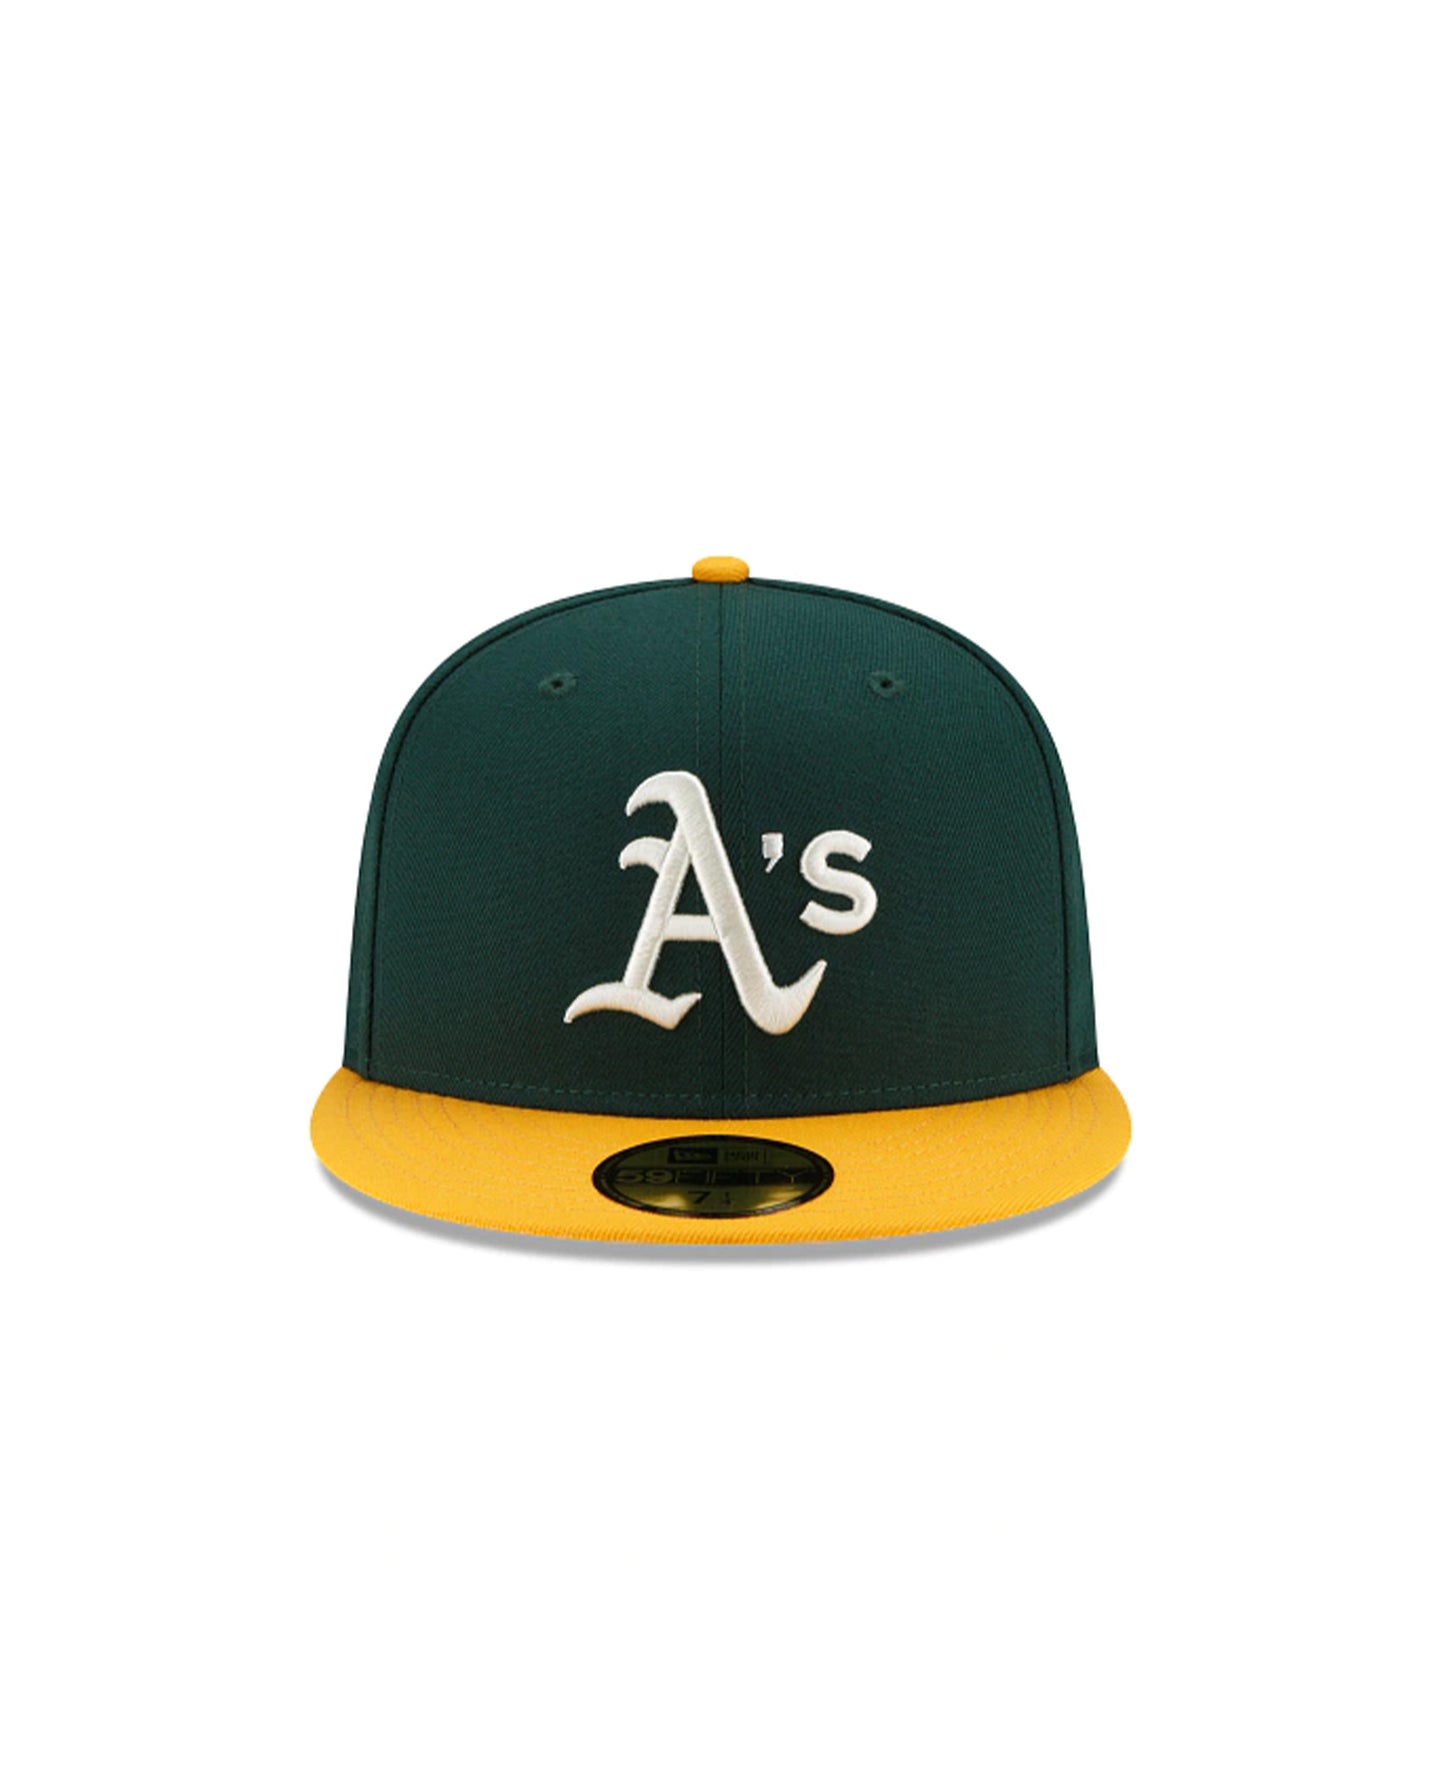 New Era Blooming 5950 Oakland Athletics Fitted Hat